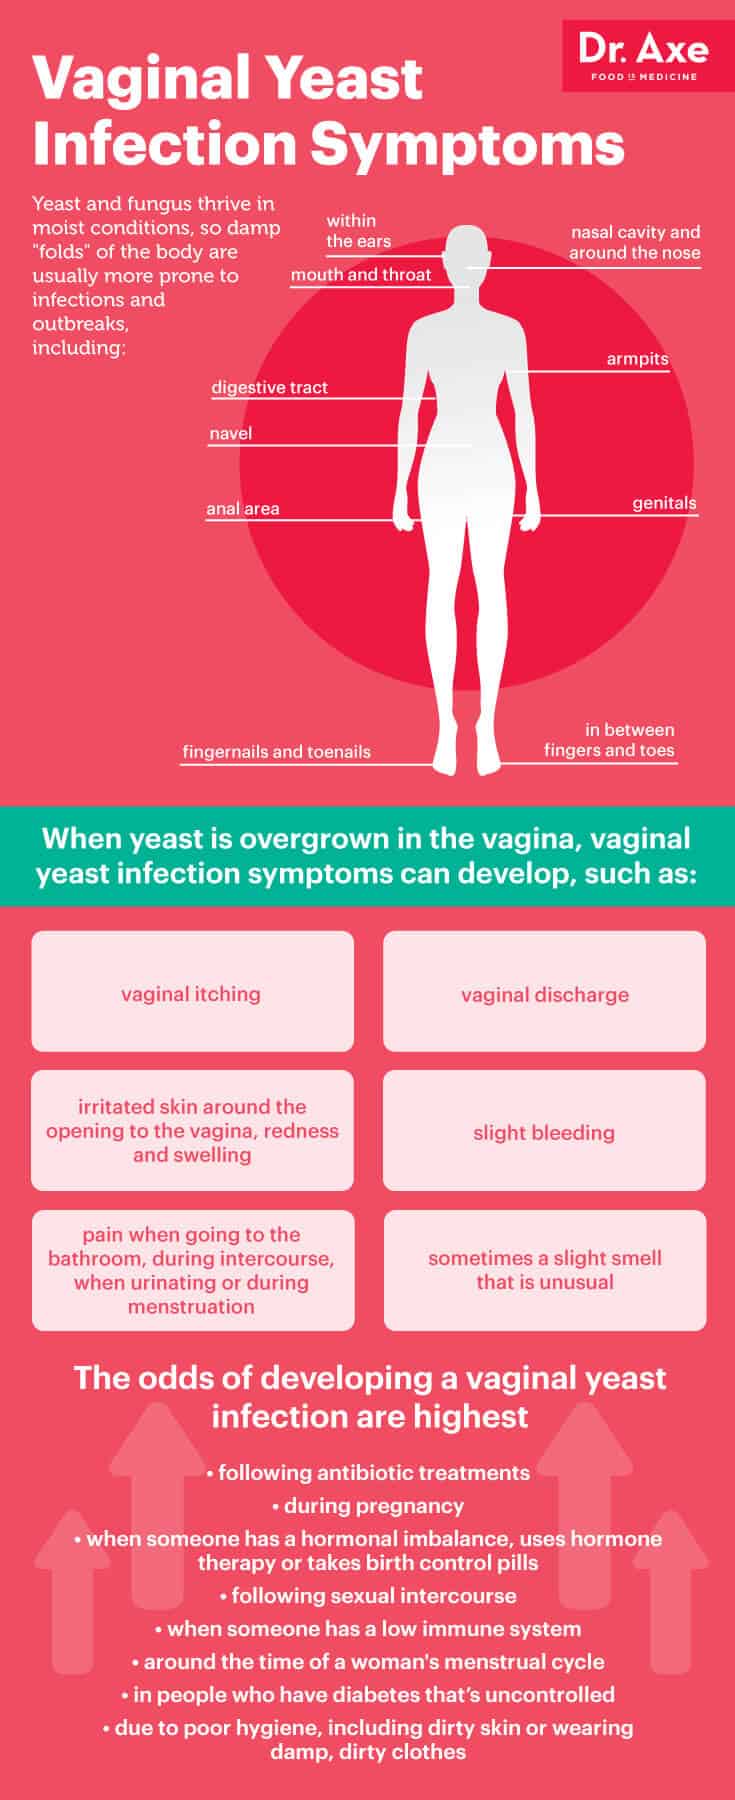 What does a yeast infection look like?